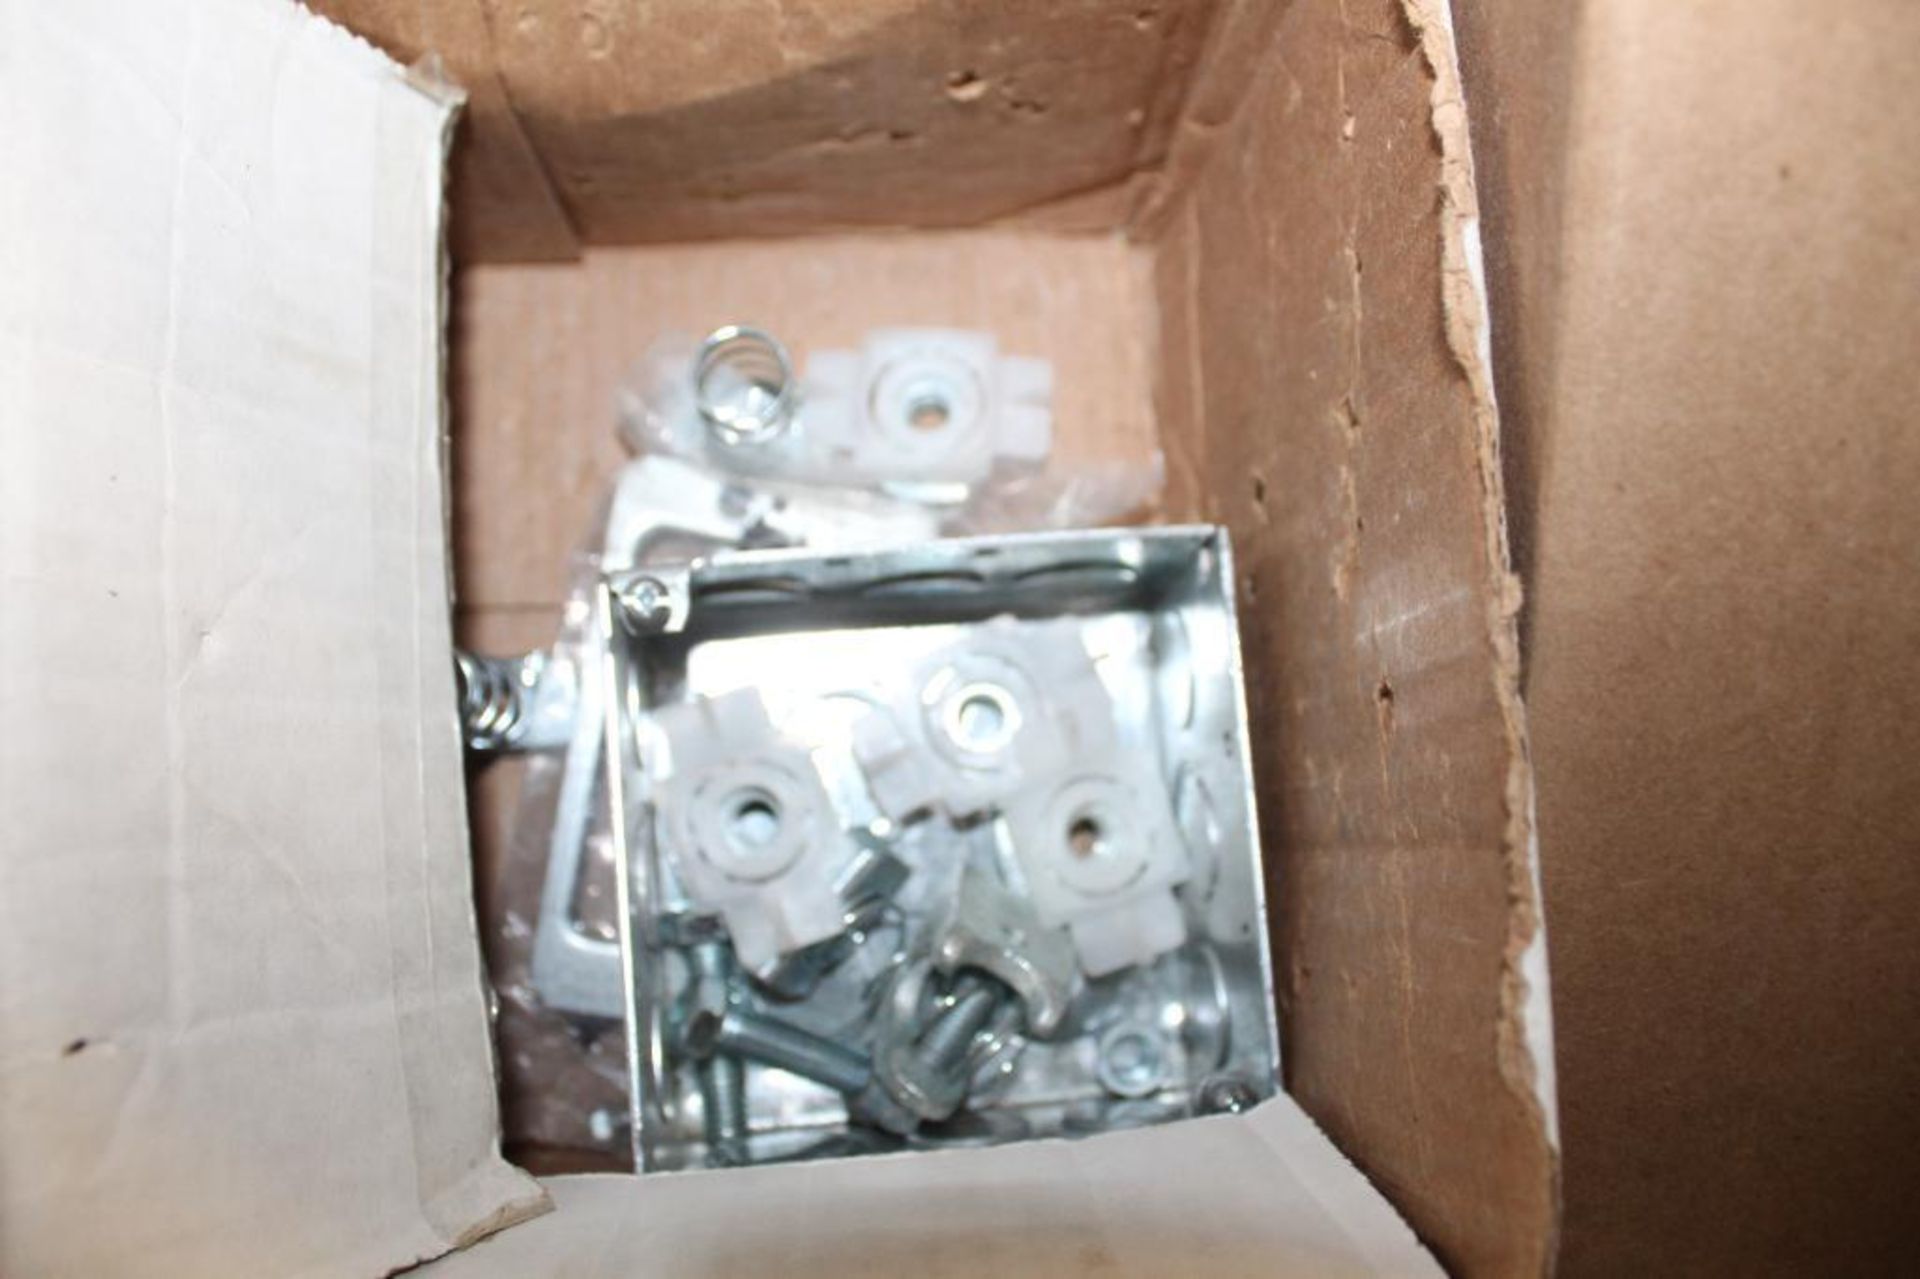 Lot of Flex Conduit, Air Filters and Hvac Hardware - Image 18 of 23